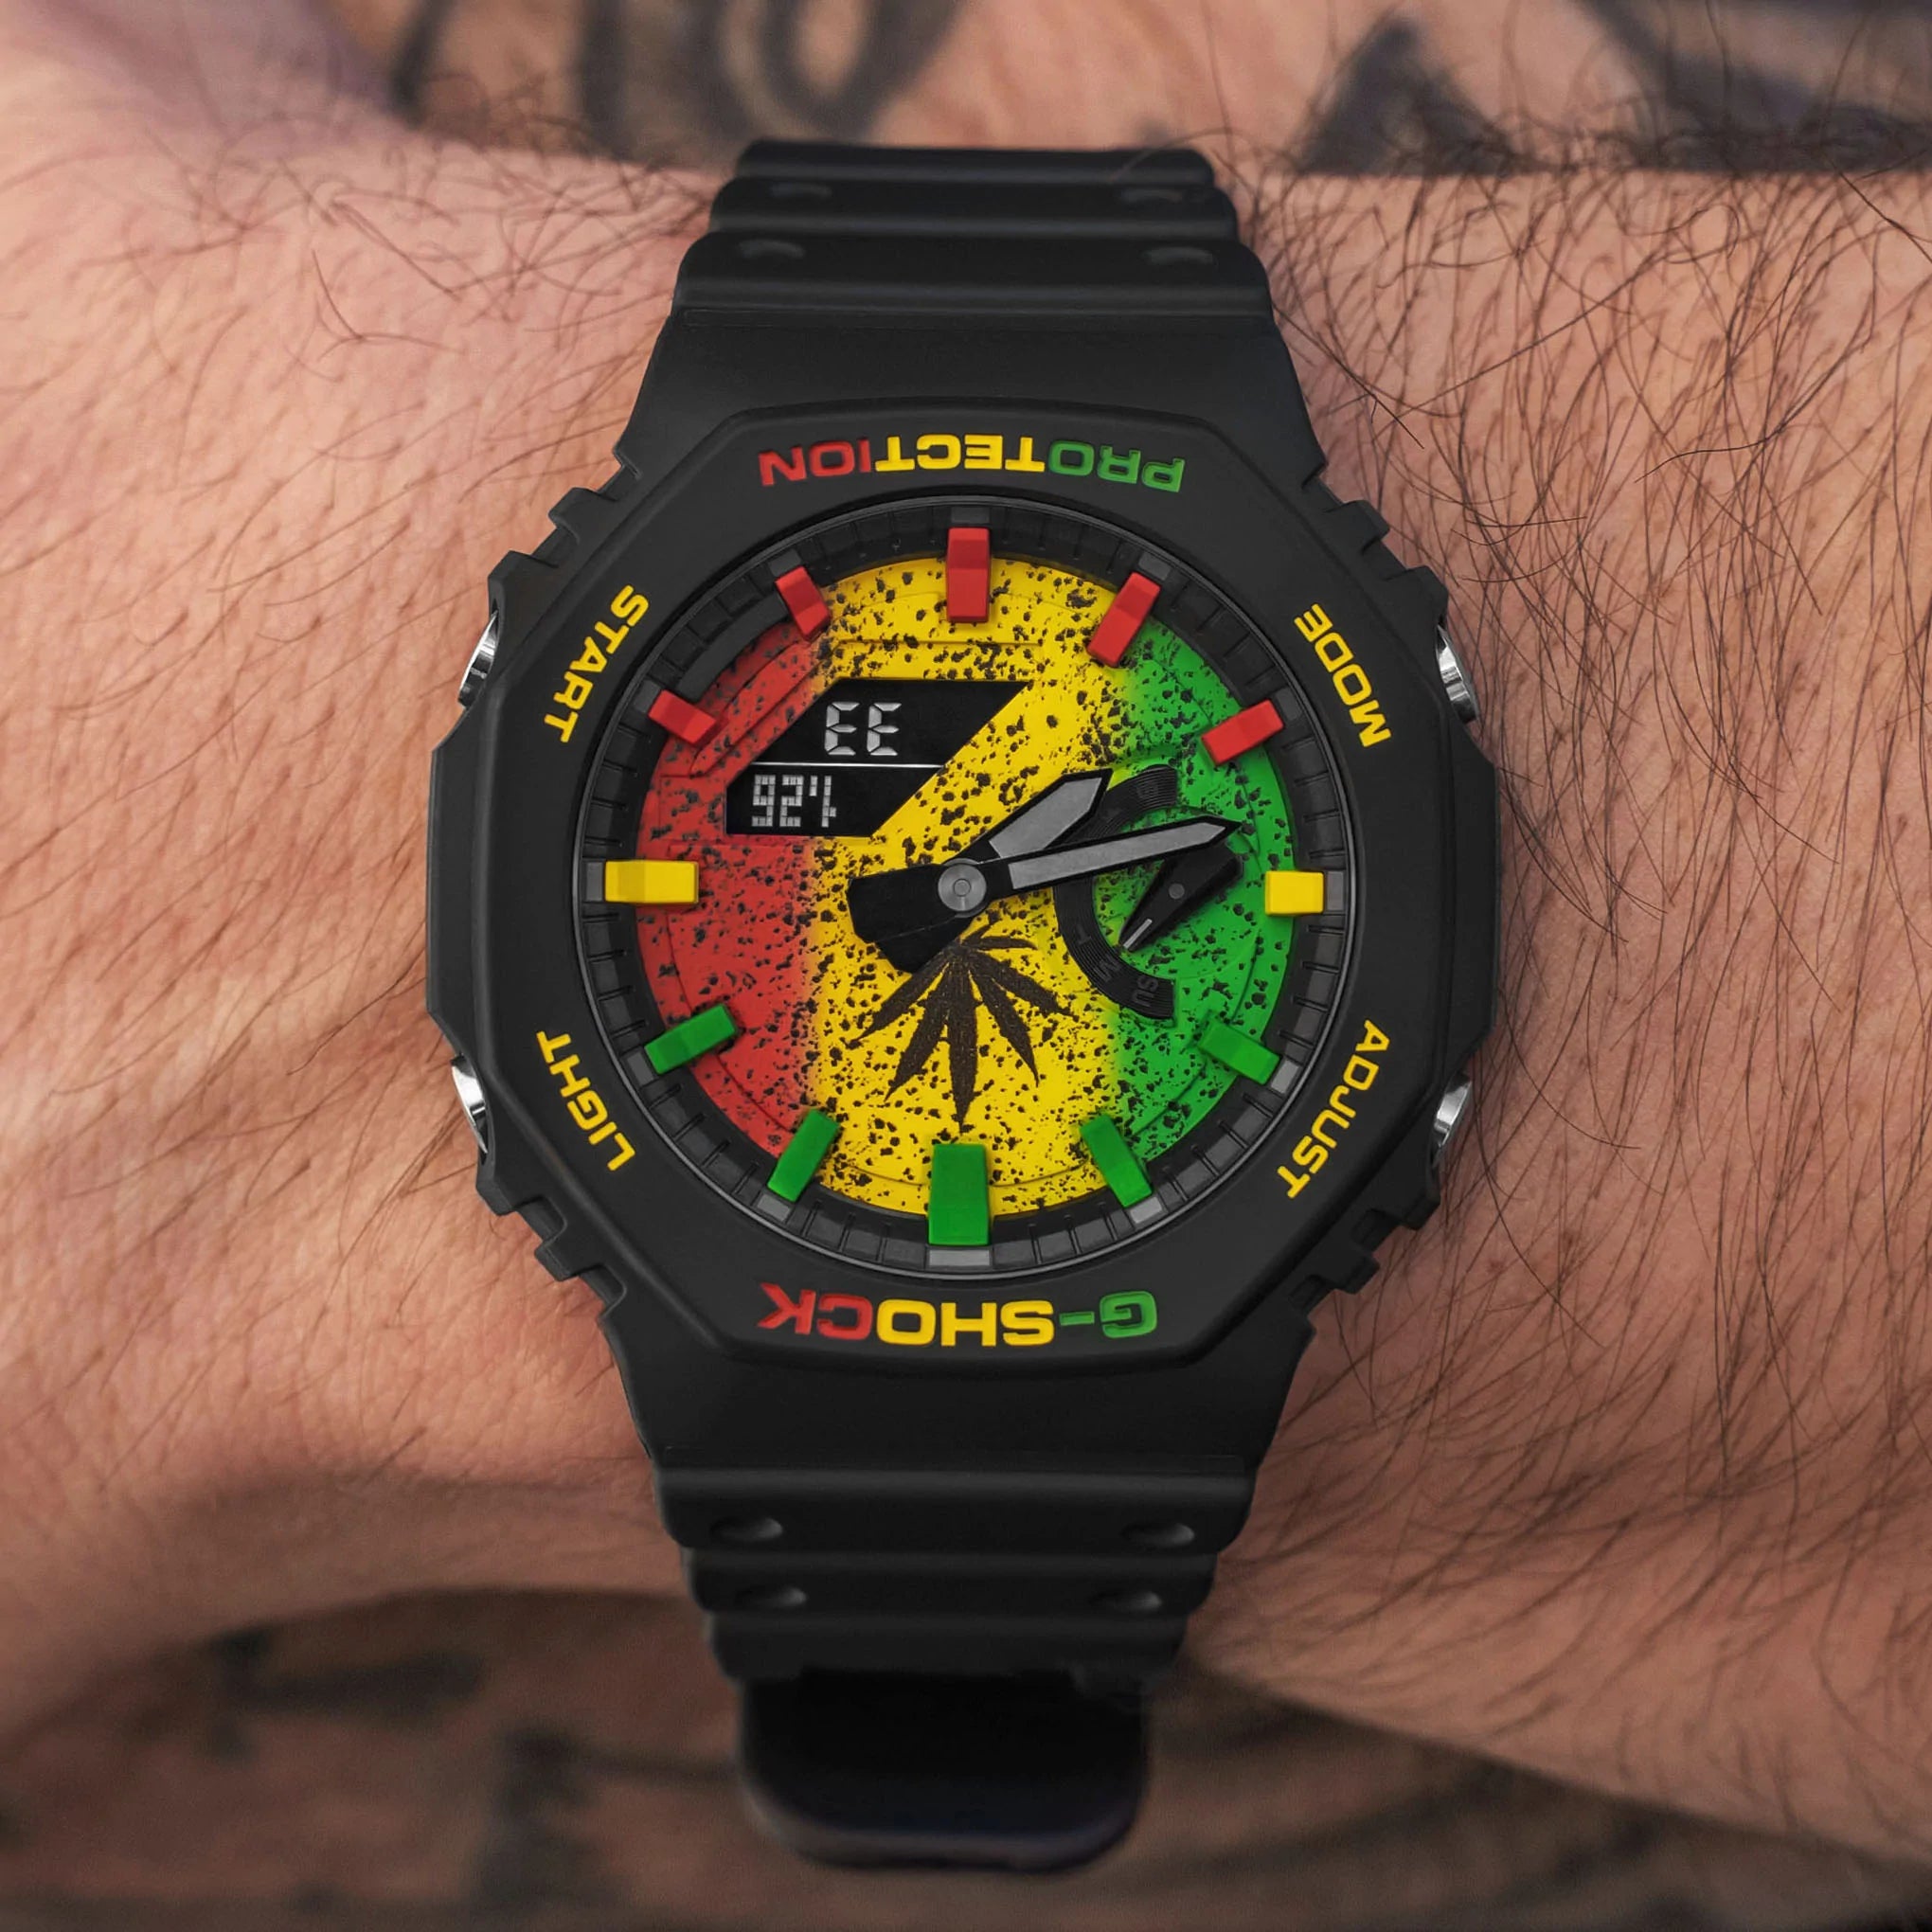 Modified G-Shock with Colourful Indices and Outer Case - CasiOak Mary Jane